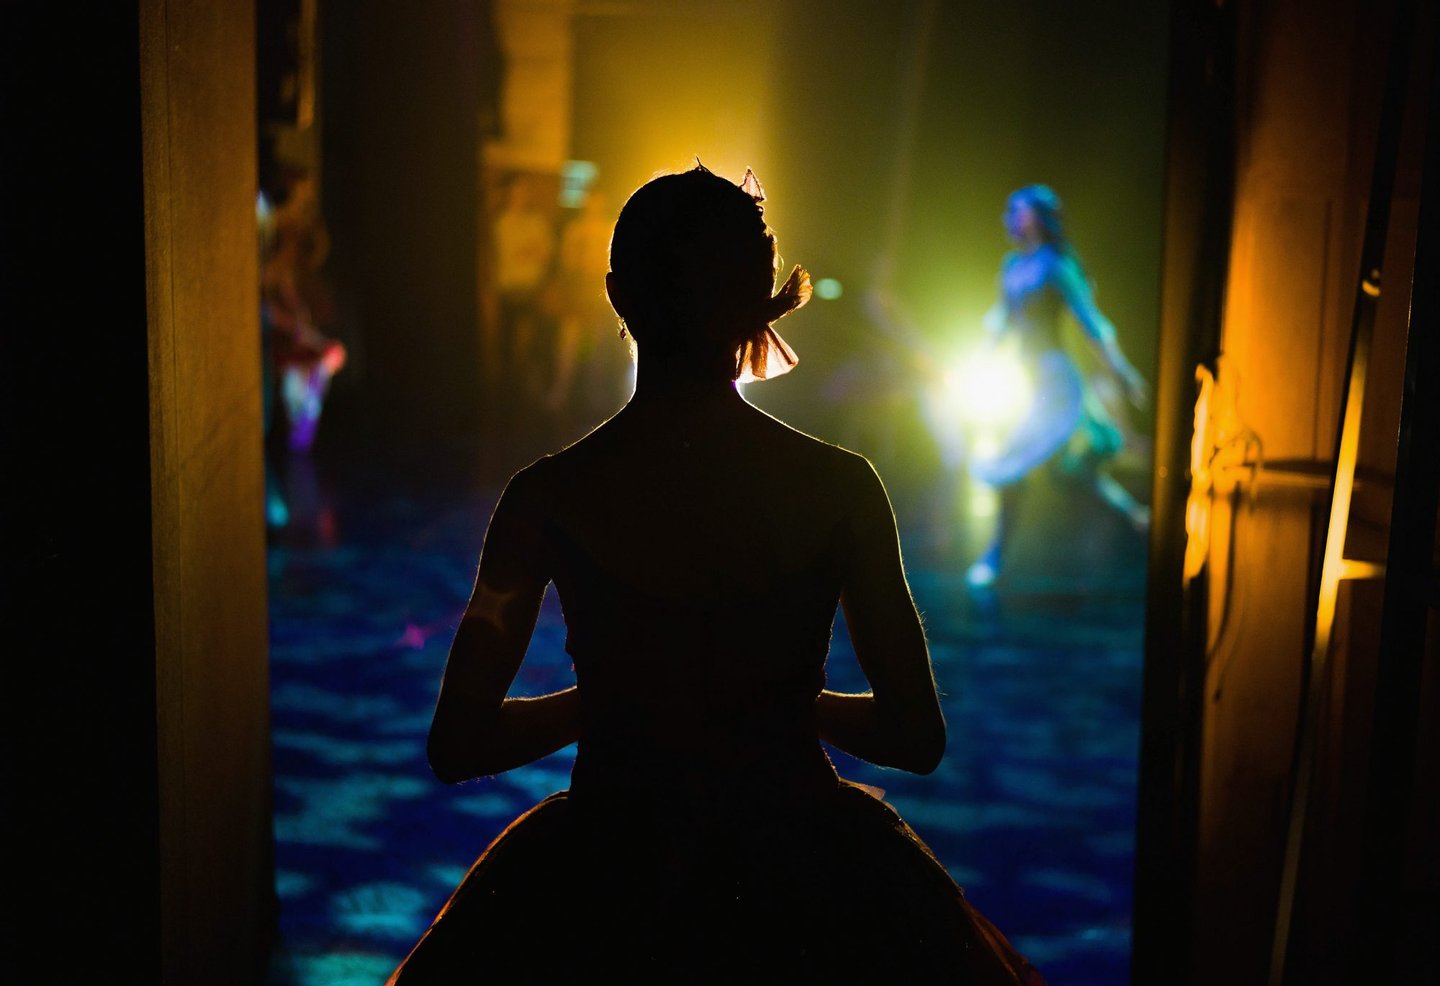 LEEDS, ENGLAND - DECEMBER 18: A ballet dancer waits in the wings for her turn to take the stage during a performance of The Nutcracker by Northern Ballet at the Grand Theatre on December 18, 2015 in Leeds, England. Northern Ballet is a dance company with a strong repertoire in theatrical dance productions where the emphasis is on story telling as well as classical ballet. Regarded as one of the world's greatest ballet companies they are committed to creating new ballets and tour widely to perform to audiences throughout the UK and abroad. (Photo by Ian Forsyth/Getty Images)